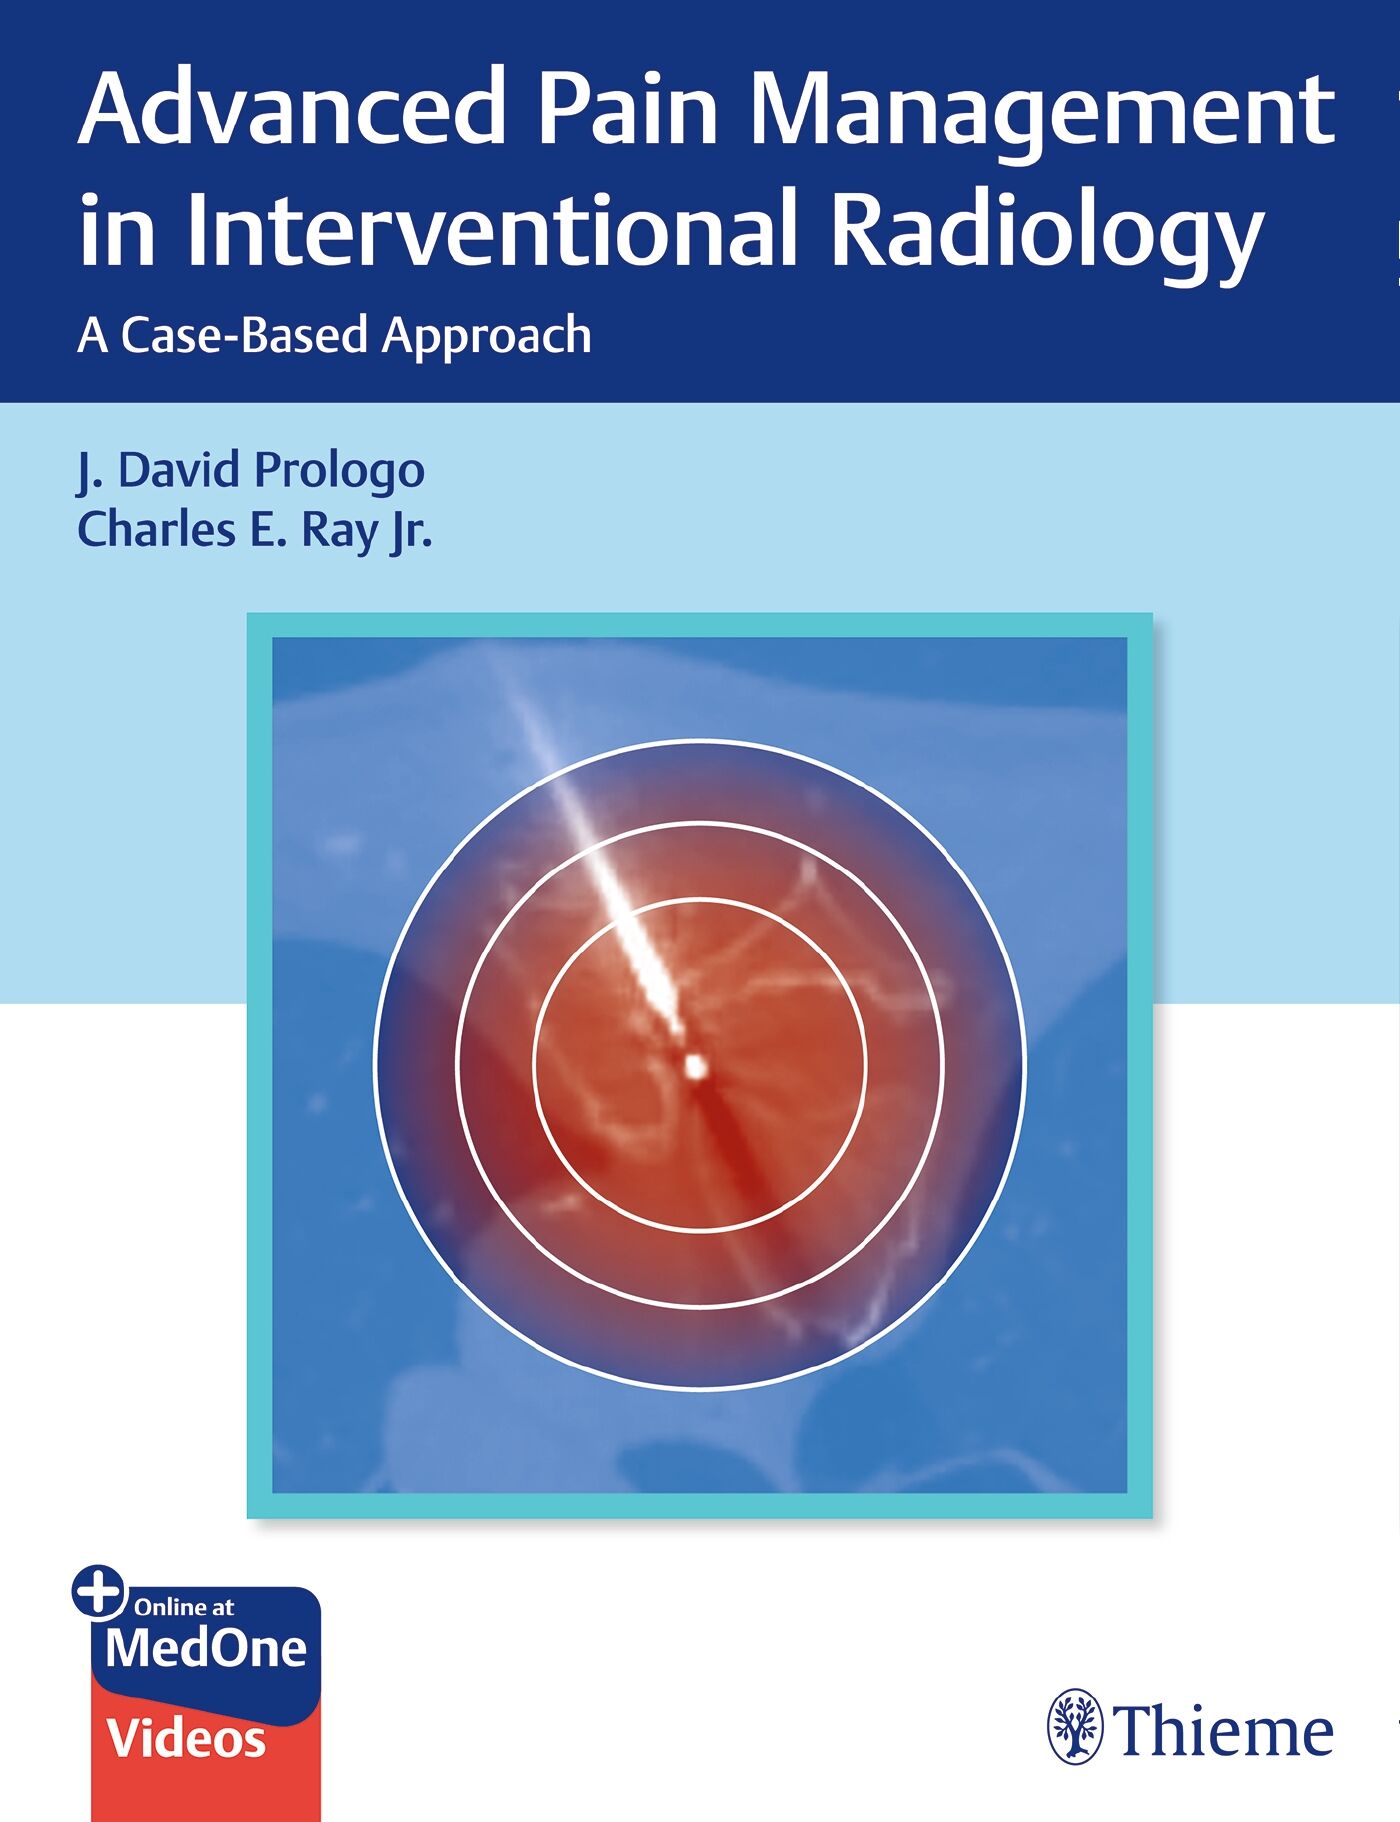 Advanced Pain Management in Interventional Radiology, 9781638536727